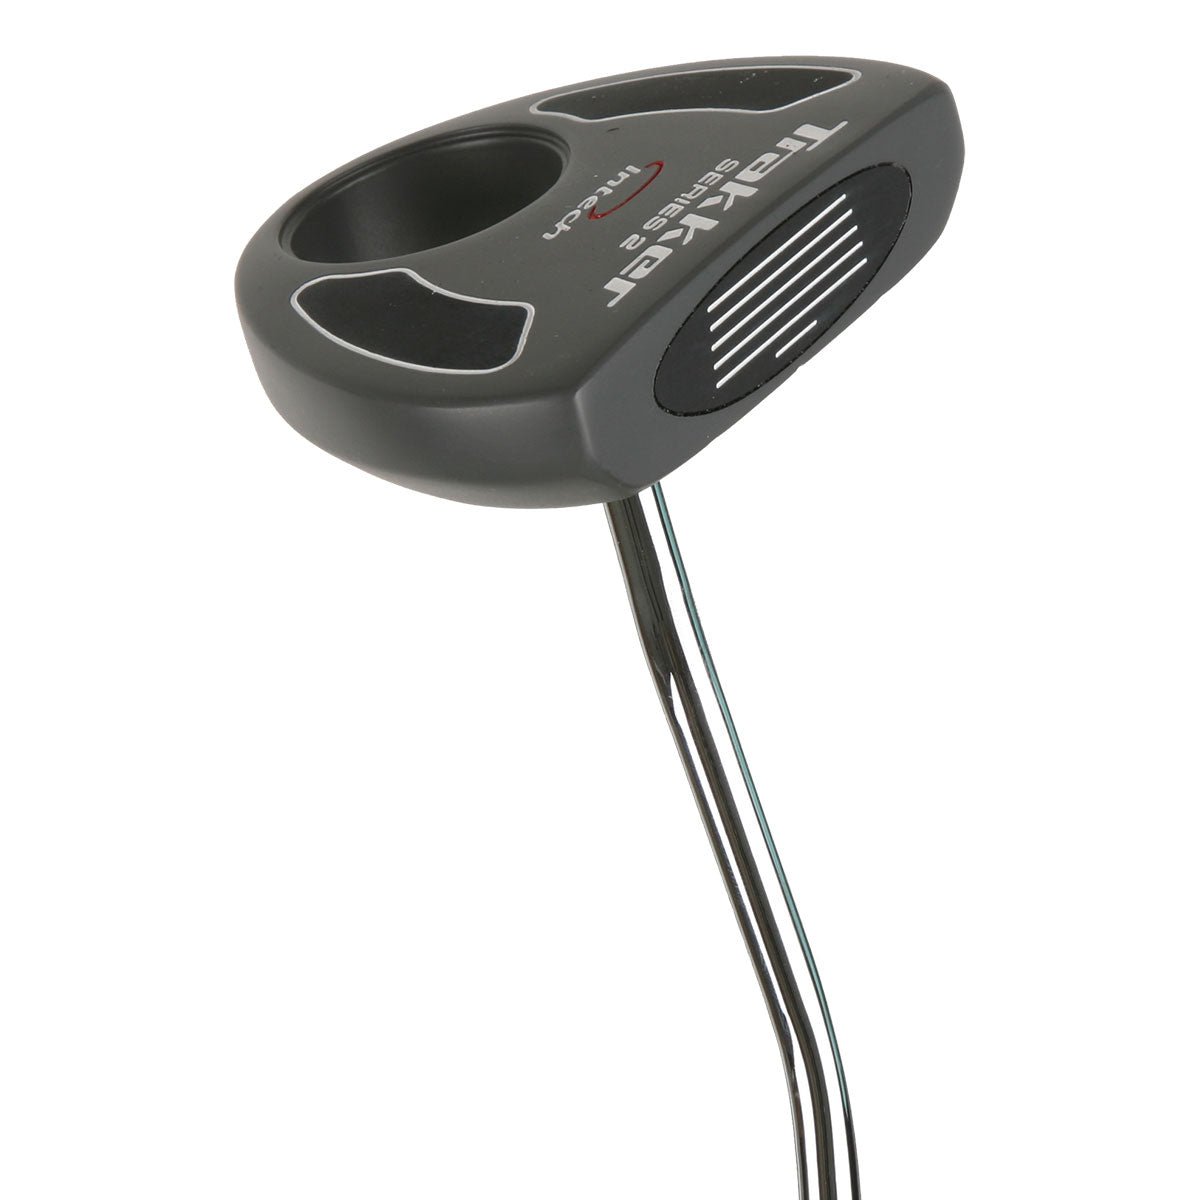 angled sole and face view of the Intech Trakker Series 2 Mallet Putter